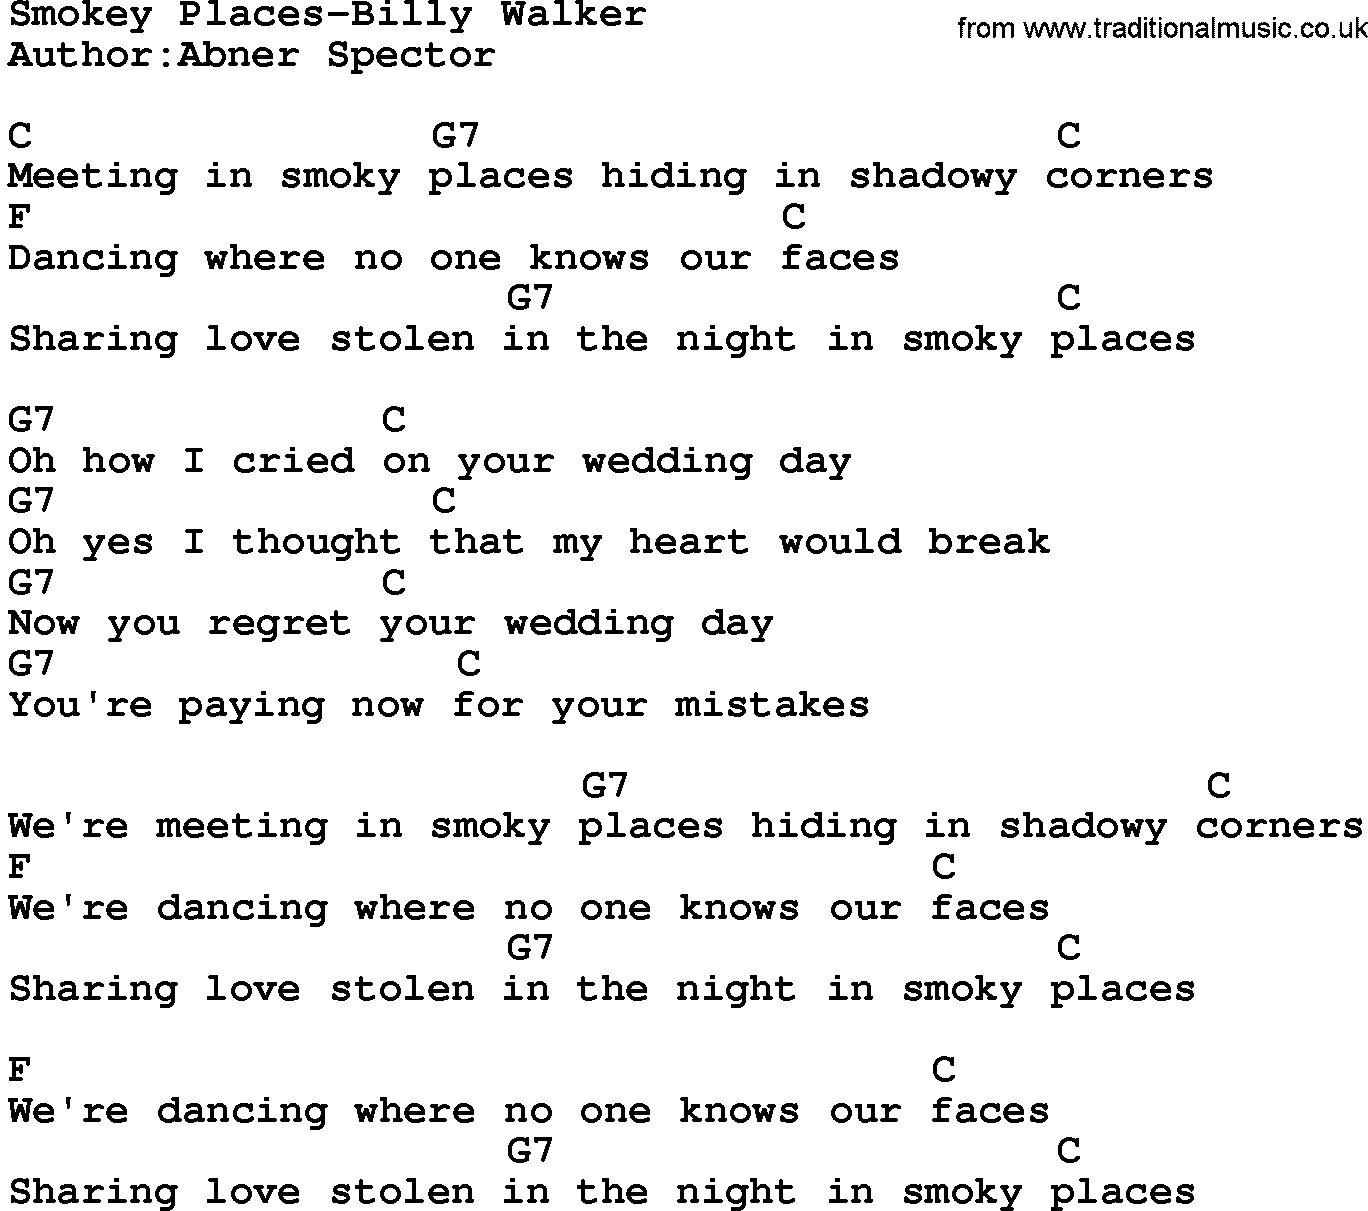 Country music song: Smokey Places-Billy Walker lyrics and chords